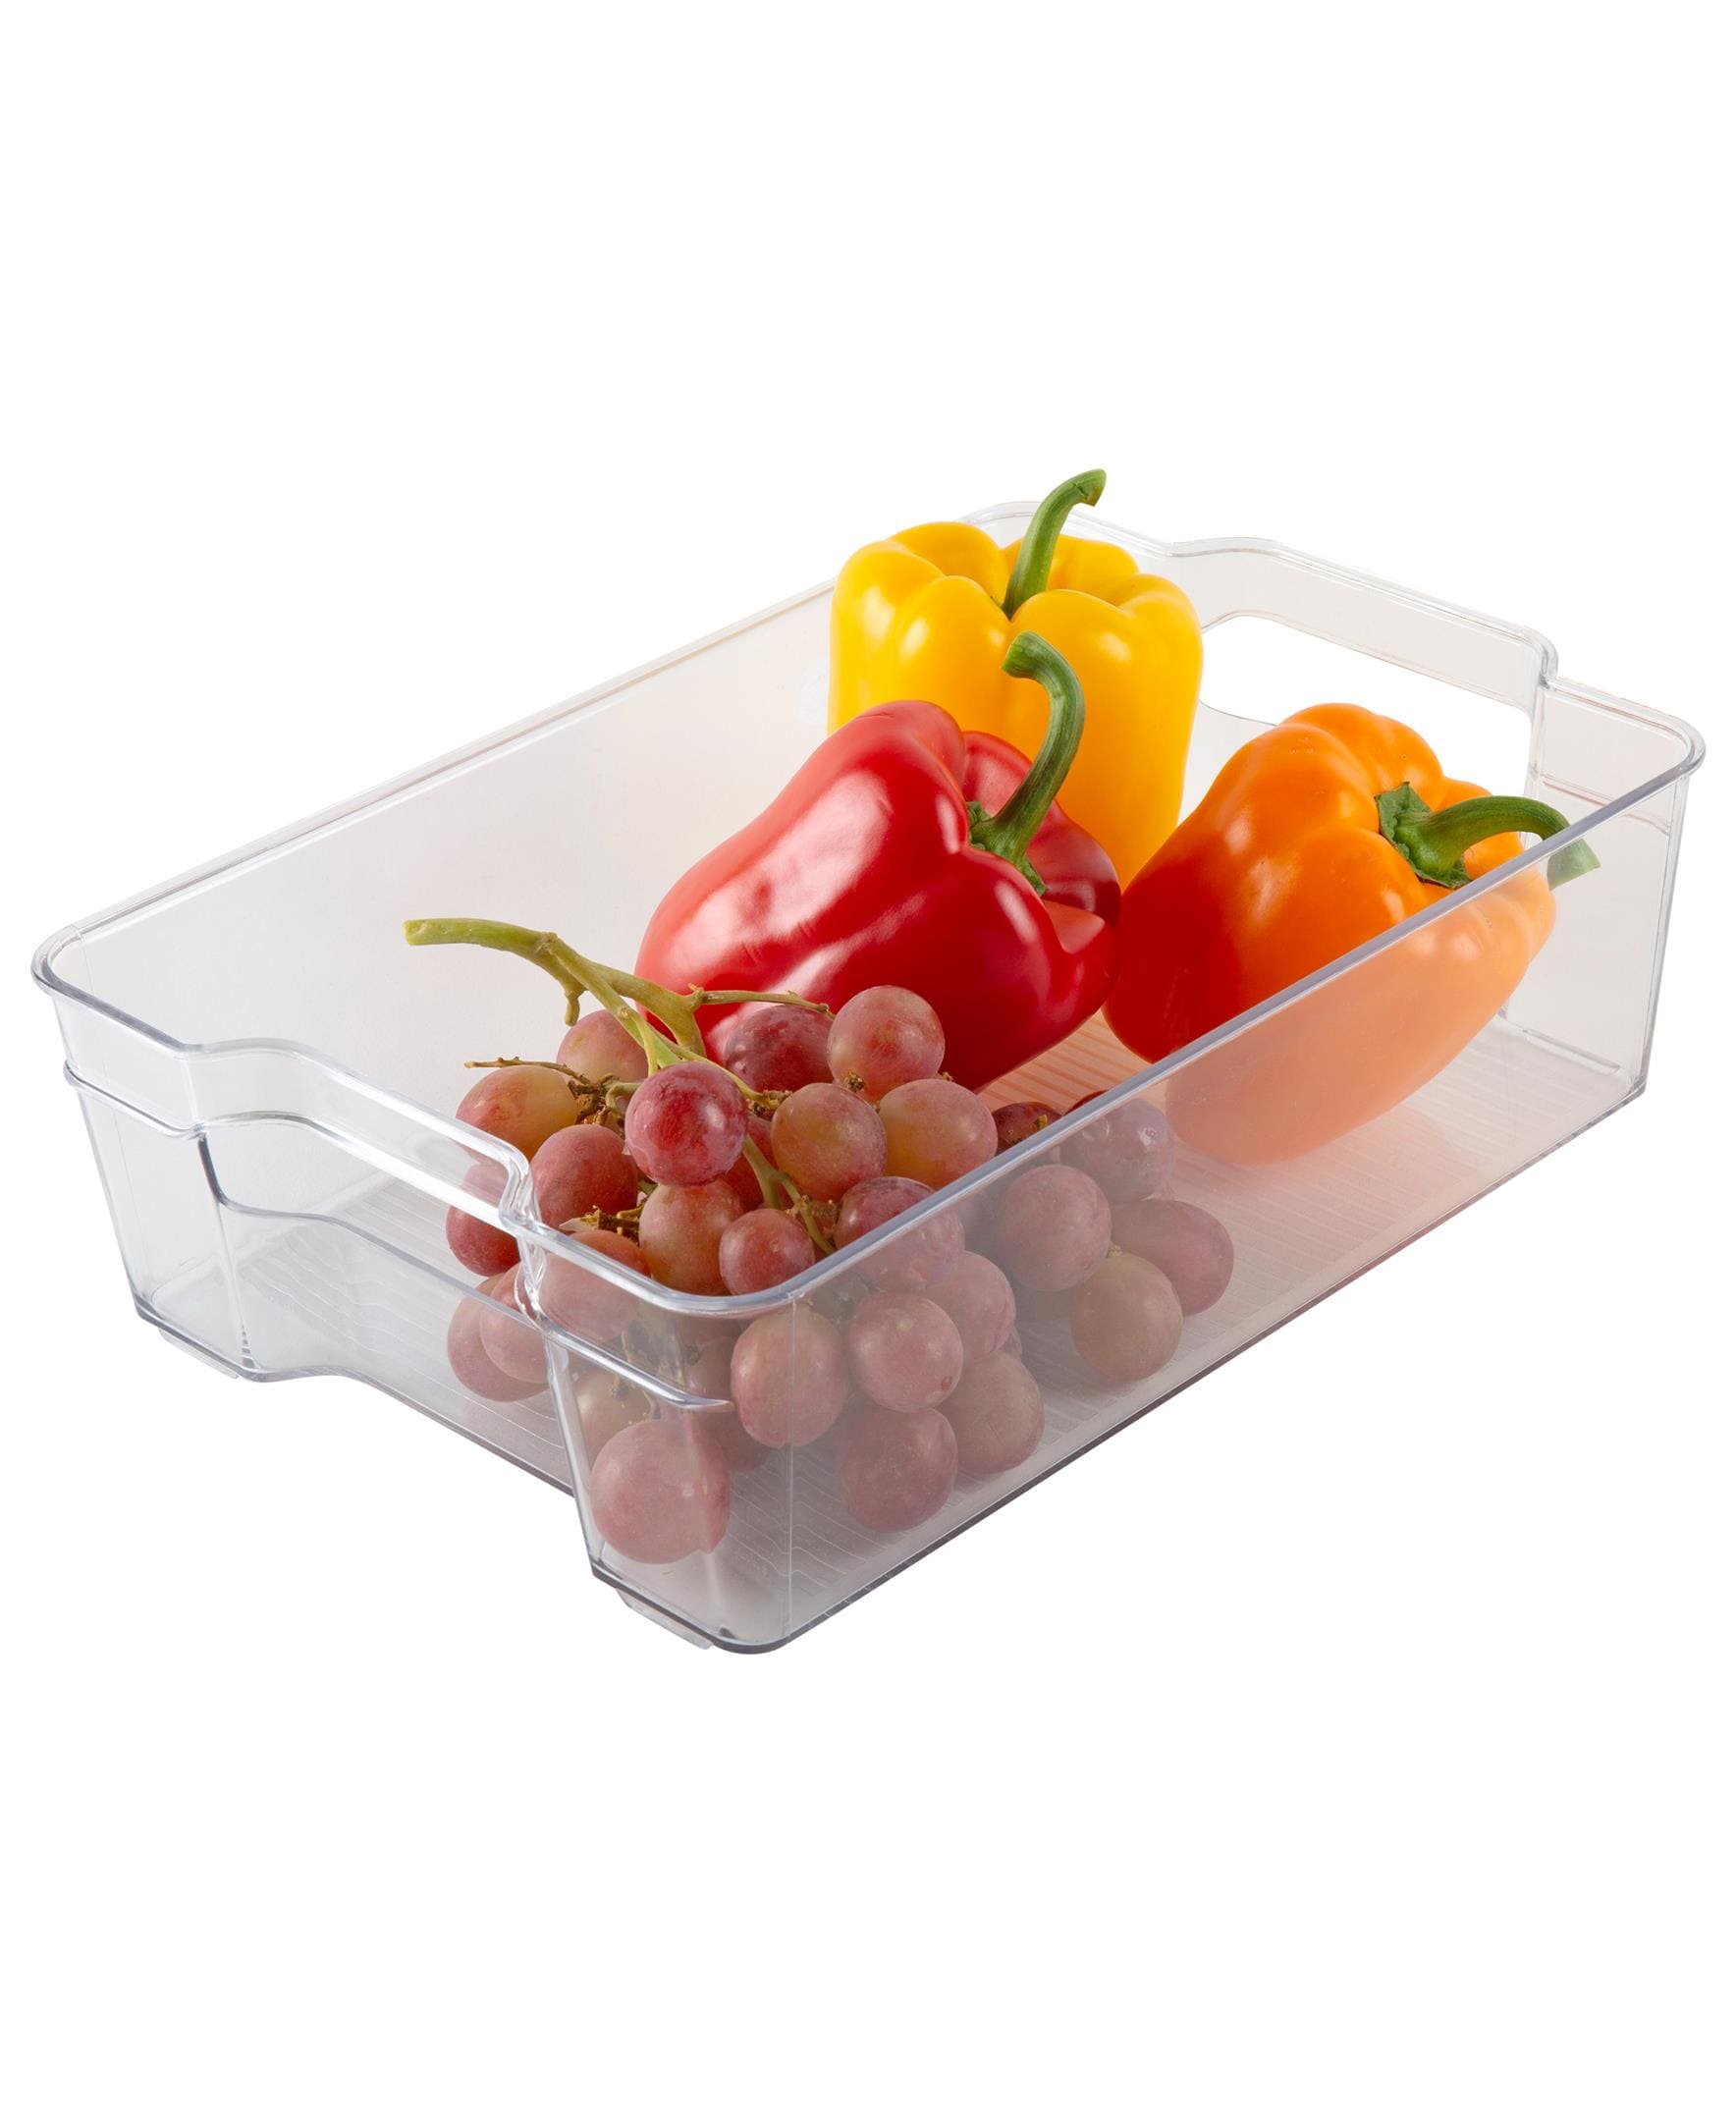 Clear Organizer Bins With 3 Removable Dividers Snack Vegetable